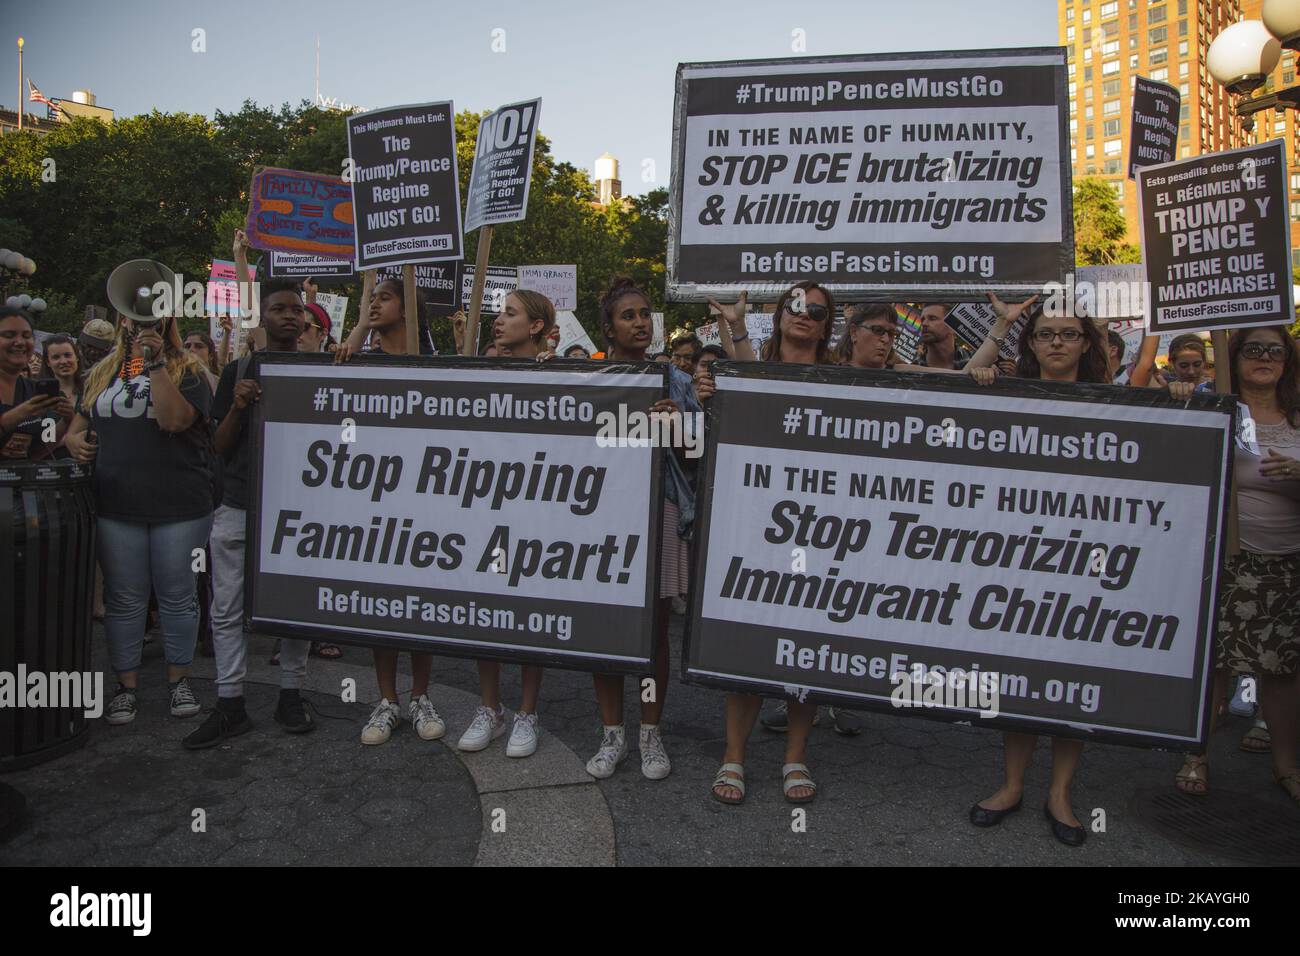 Protesters marched against ICE's actions and the president's support of separating families. in New York City, US, on 19 June 2018. (Photo by Shay Horse/NurPhoto) Stock Photo